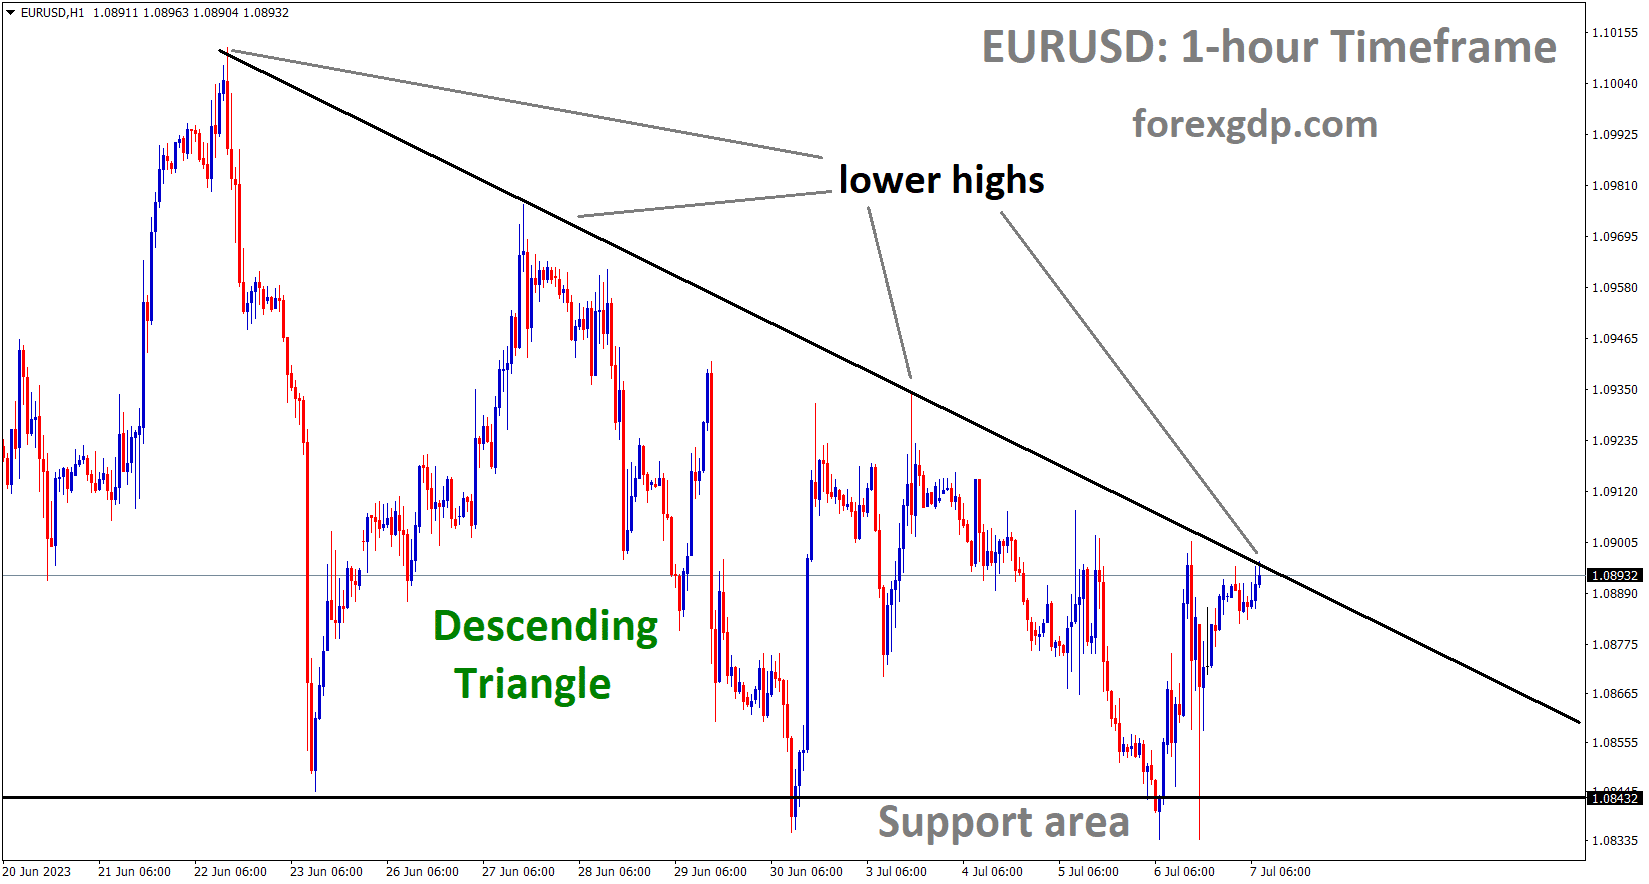 EURUSD H1 TF analysis Market is moving in the Descending triangle pattern and the market has reached the lower high area of the pattern 1